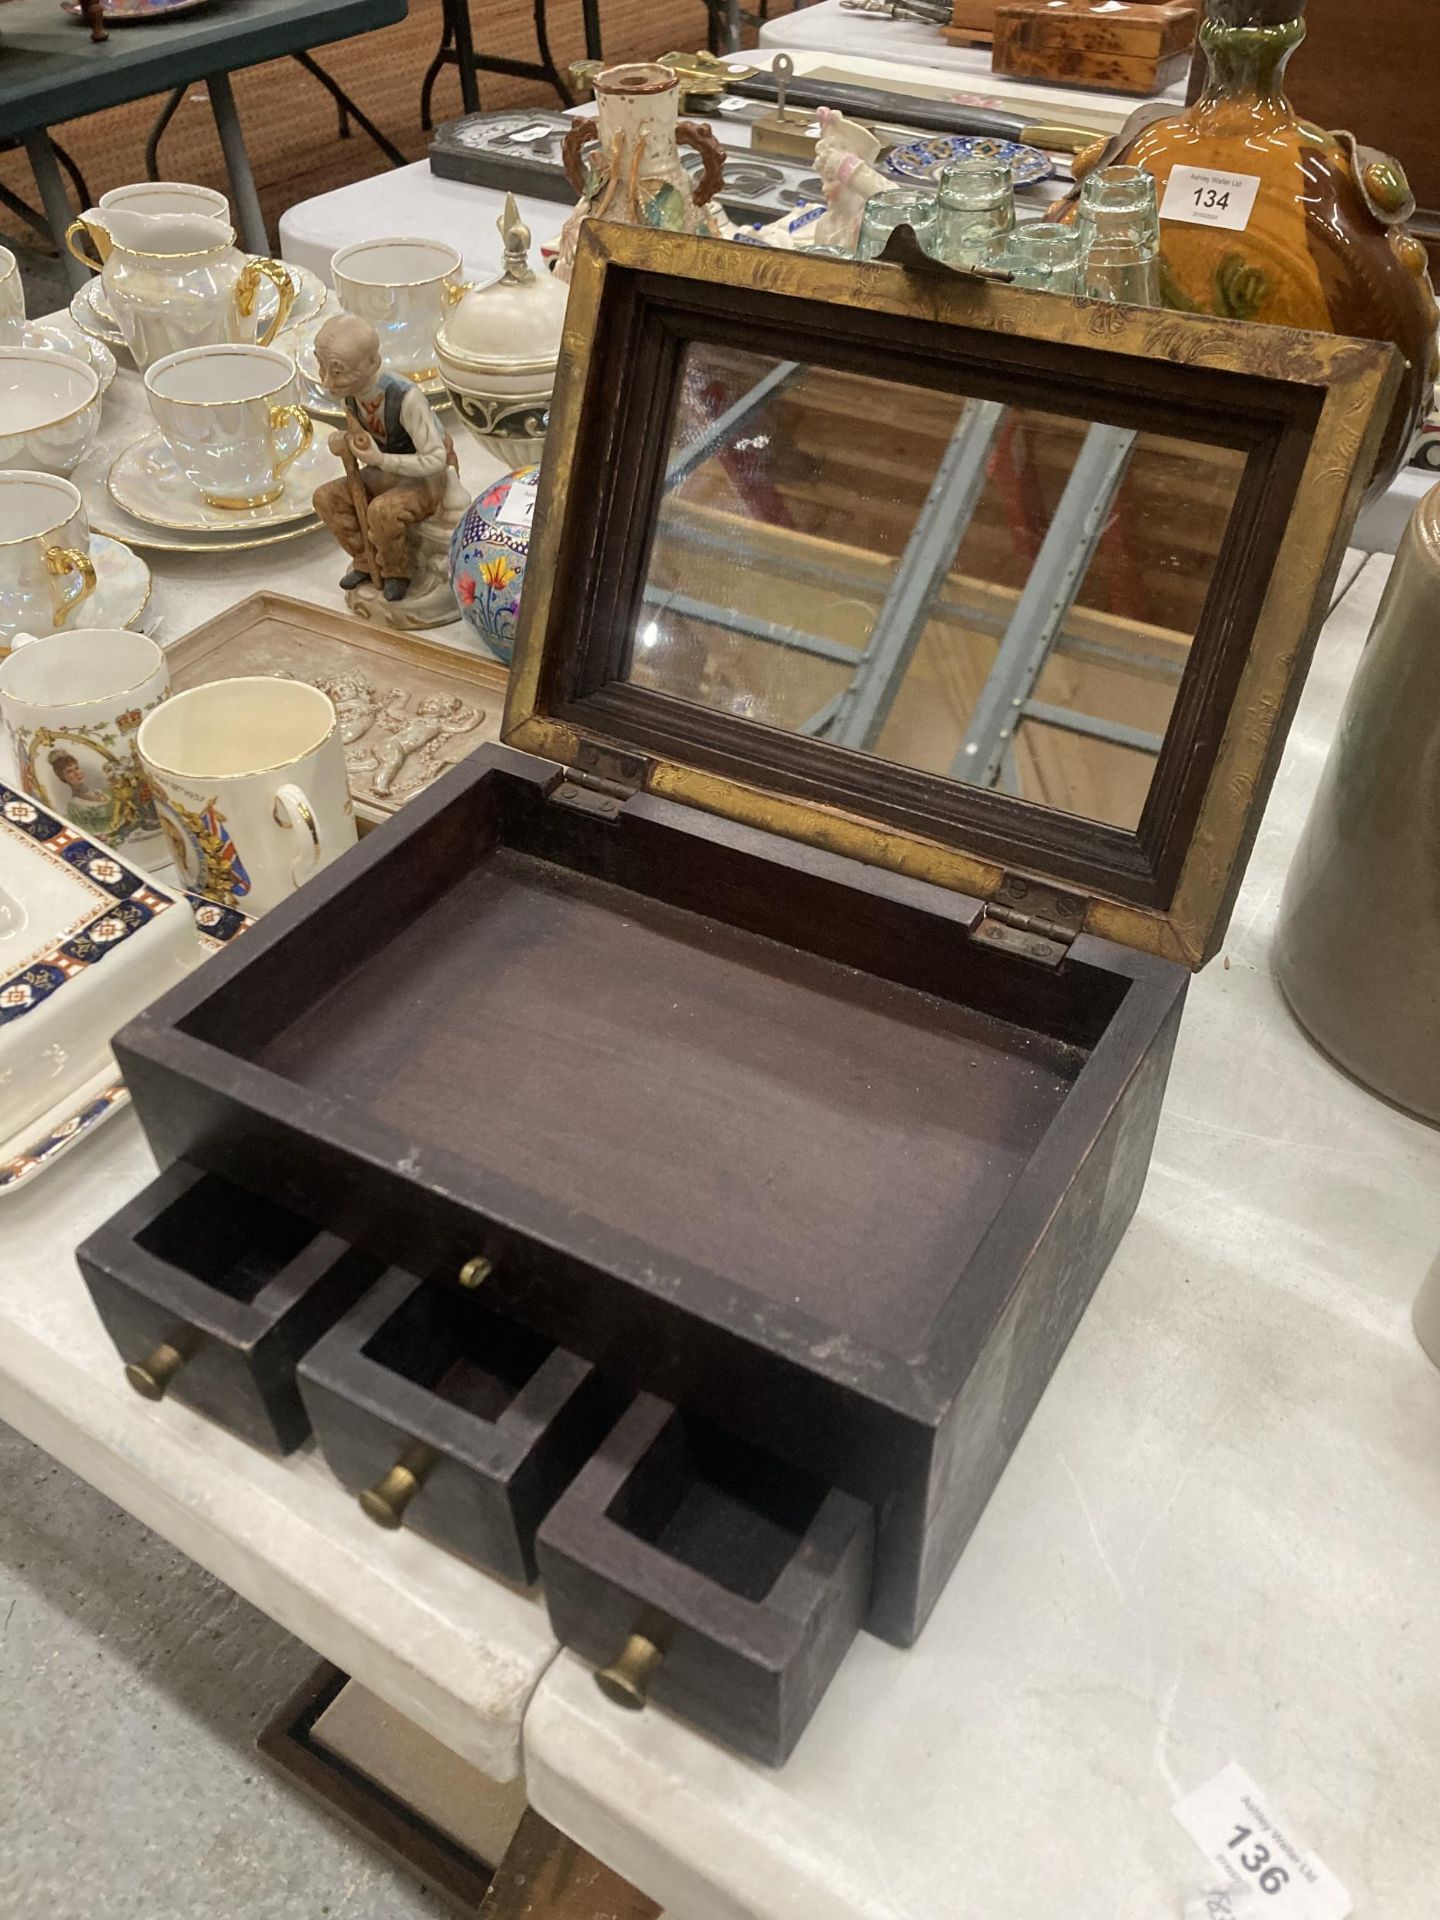 A WOODEN BOX WITH THREE DRAWERS AND A METAL TOP, H - 13CM, W - 25CM, D - 17CM